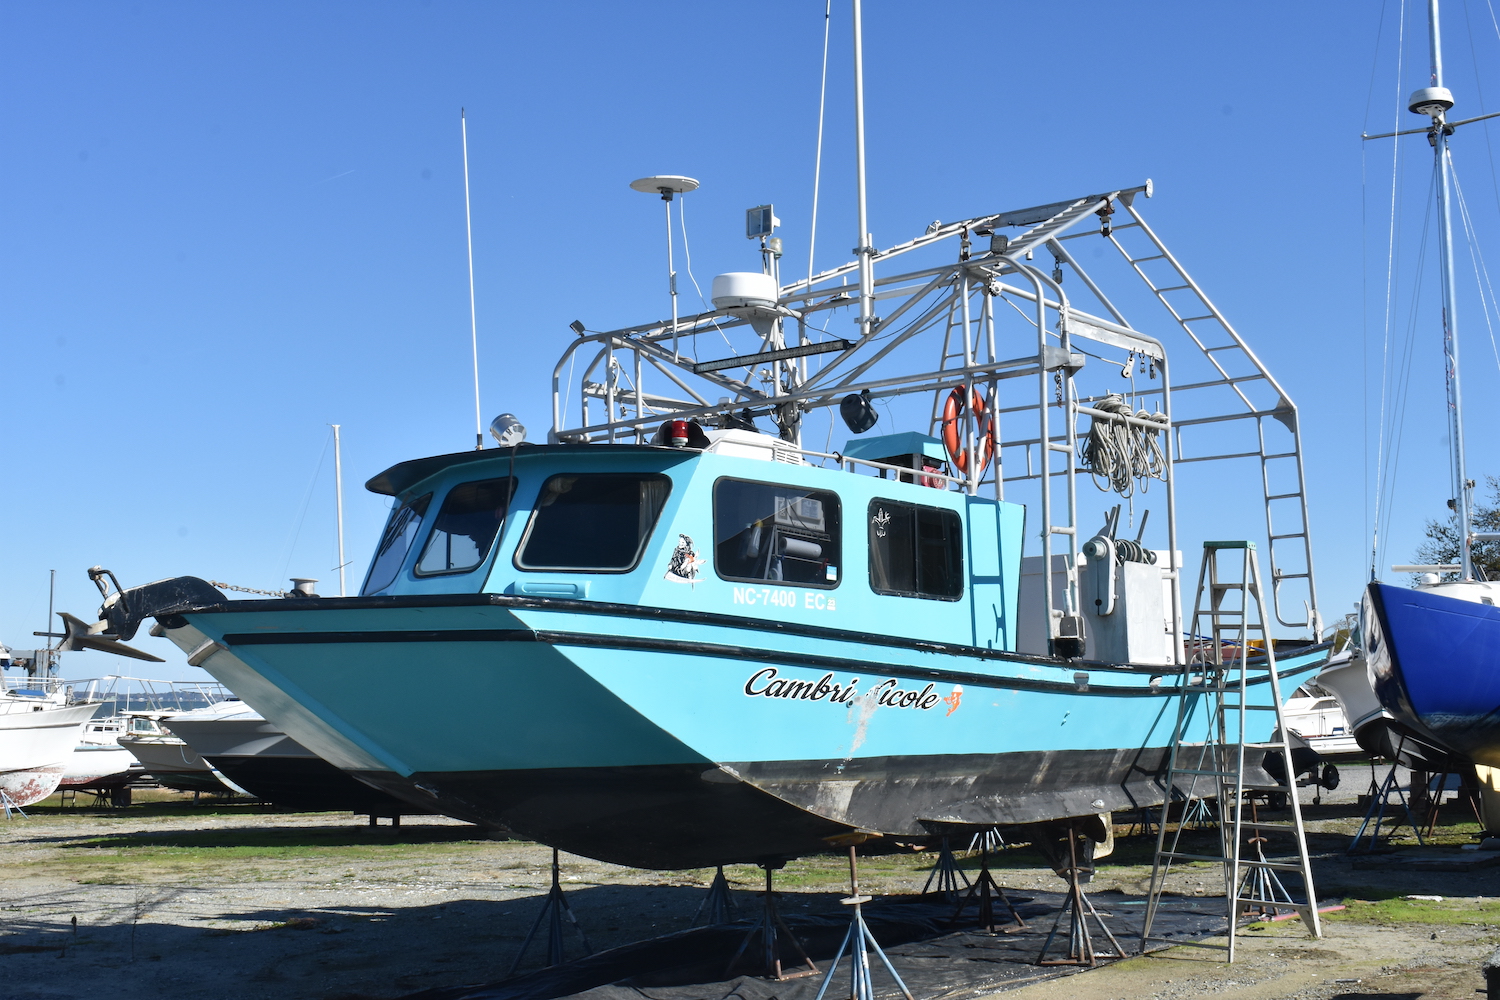 Cajun shrimp boat gets a second act with Virginia oysters